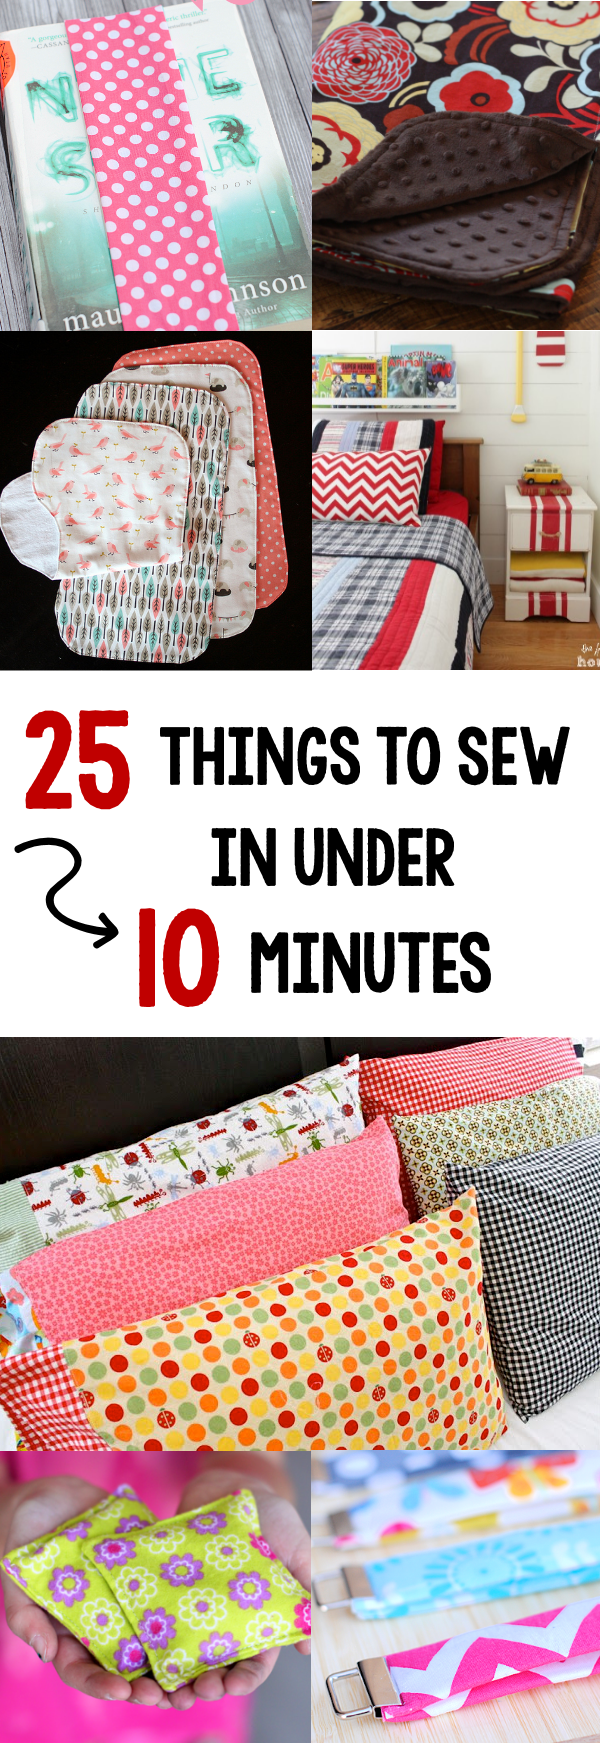 25 Projects to Sew in 10 Minutes - The Daily Seam